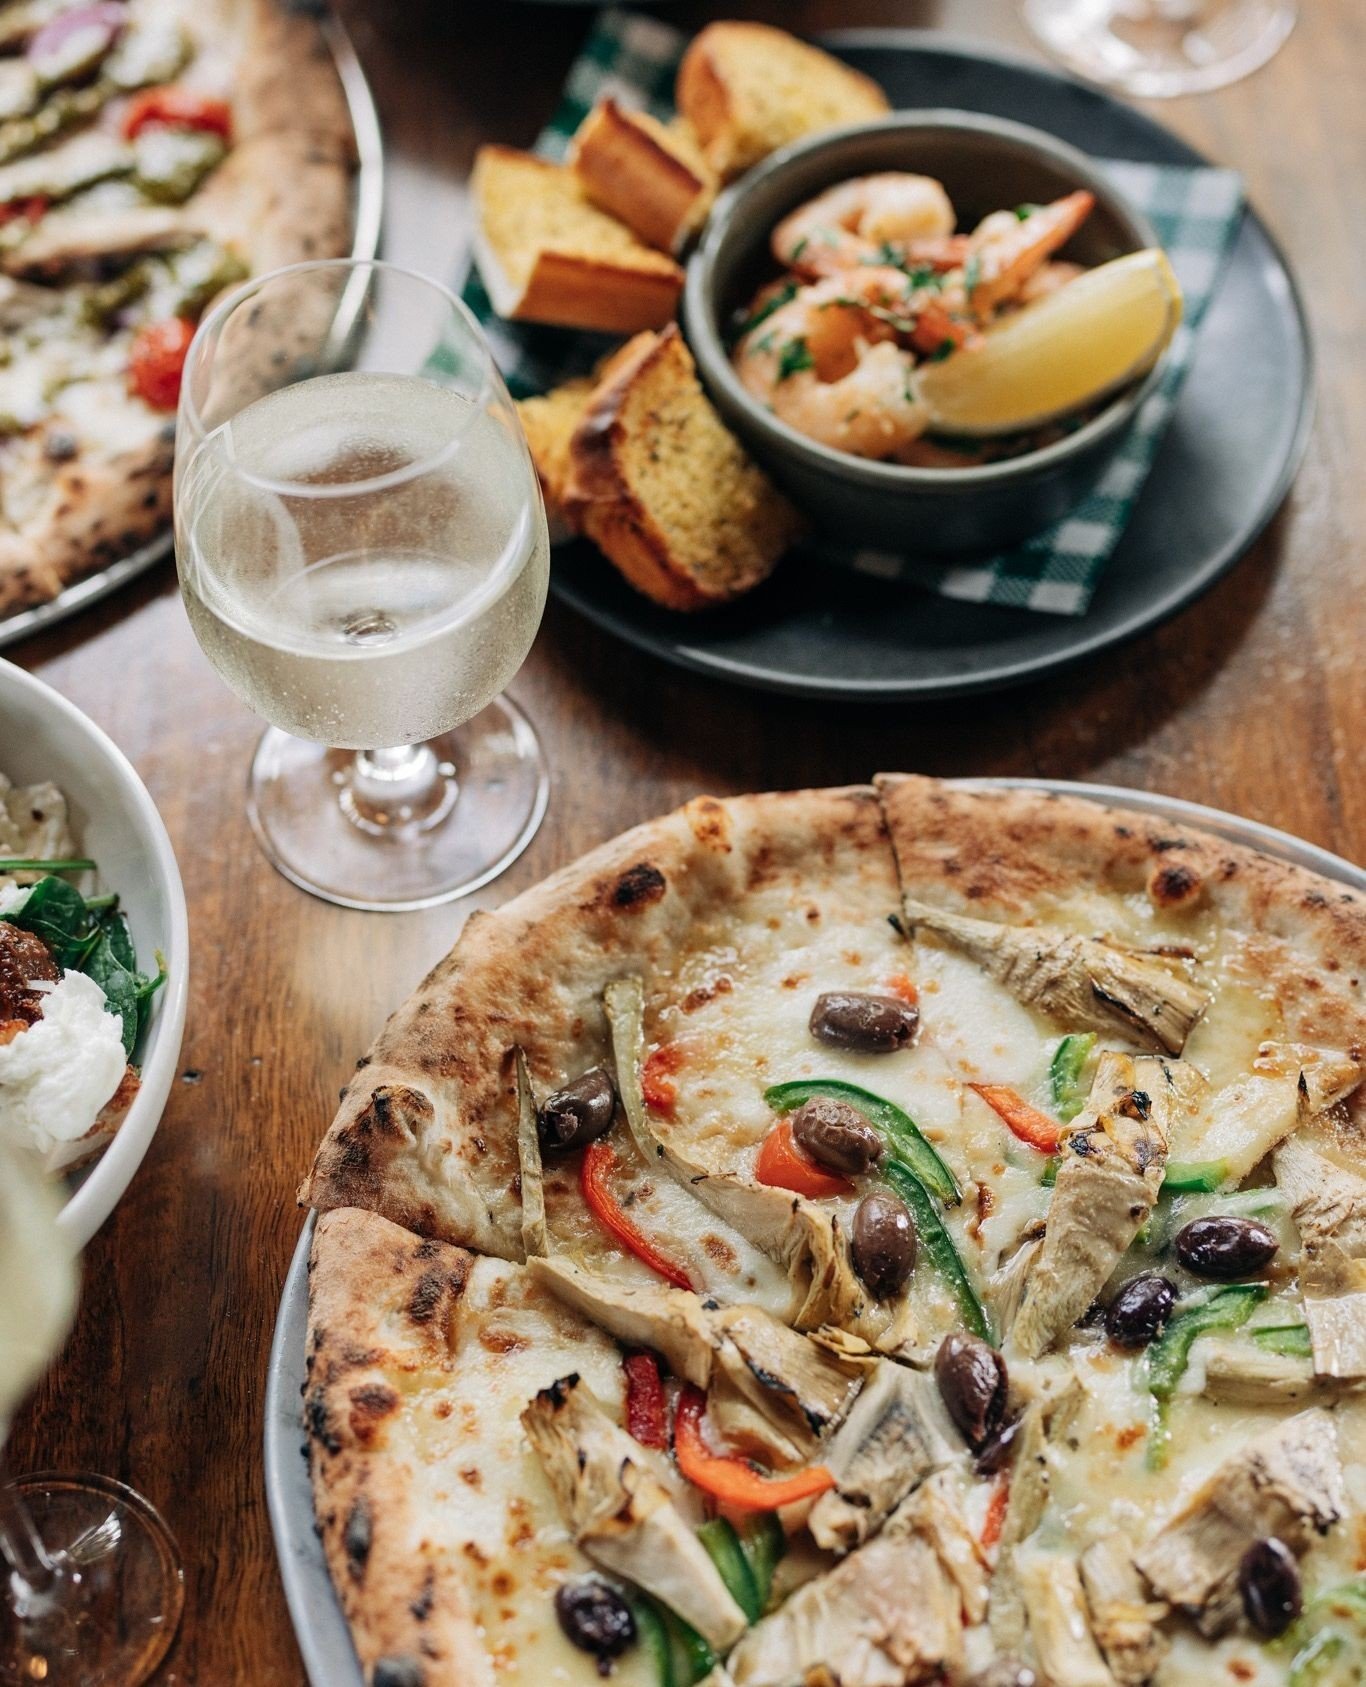 Quality ingredients, expertly crafted. That's the promise behind every dish we serve, from our hand-made pasta to our wood-fired pizzas and everything in-between. Book your table for the weekend now! 🍝 #parrystgarage